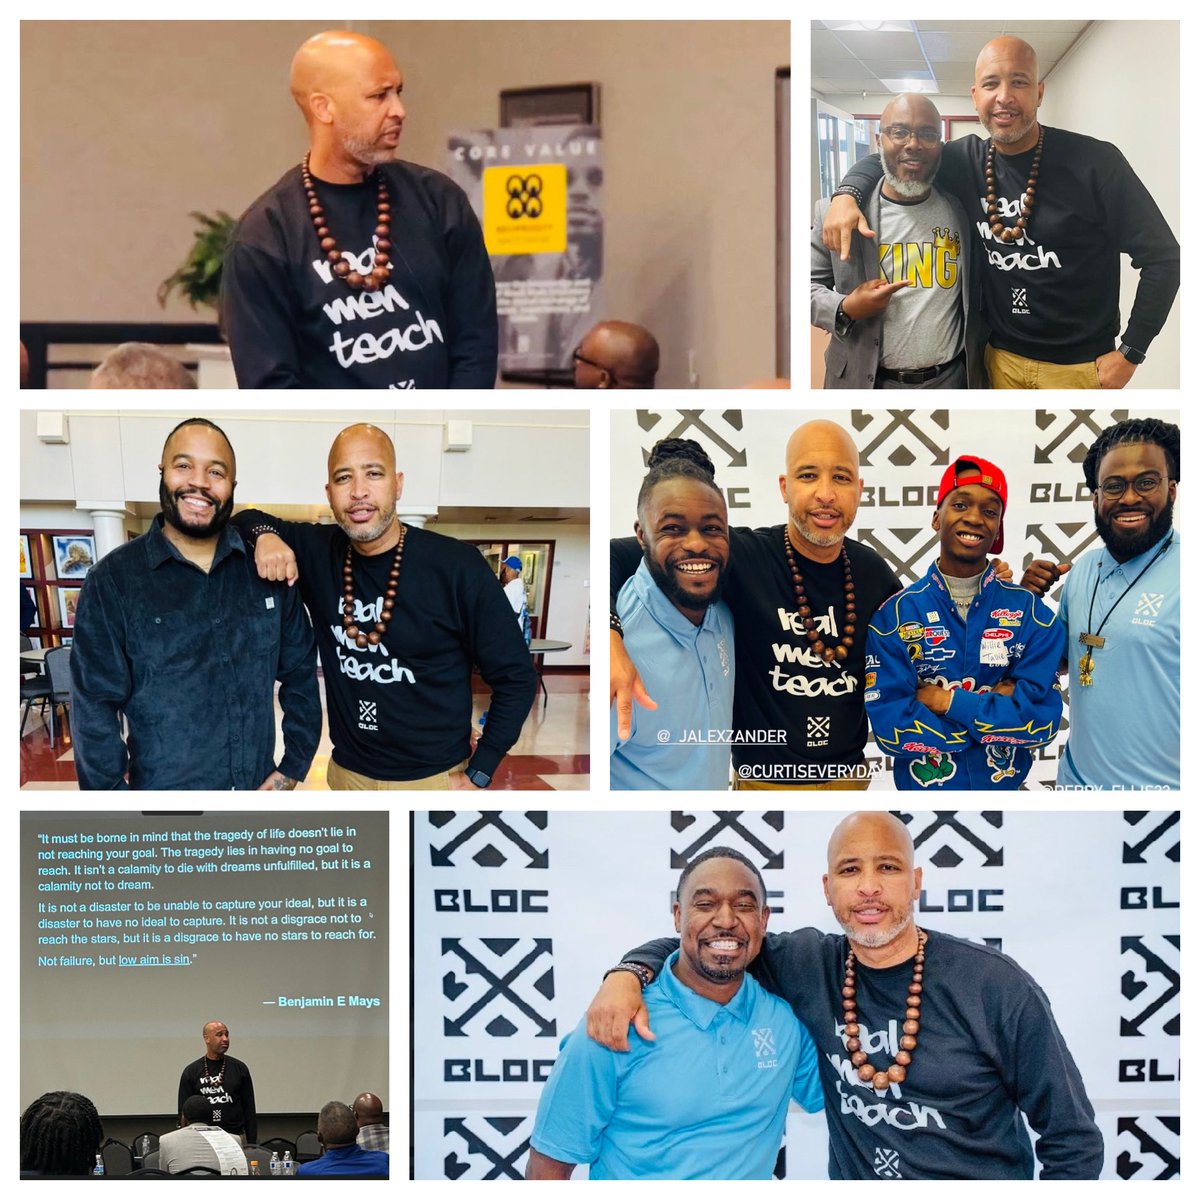 It Was All Good Just A Week Ago! ✊🏾 Salute Cornell Ellis & @BlockcThe family for adopting me into their brotherhood and inviting me to keynote LiberatEd Summit! I’ll be back in KC this week to keynote @amplify_kc too! I may been to buy property 🏠 in KC! @RealMenTeach2